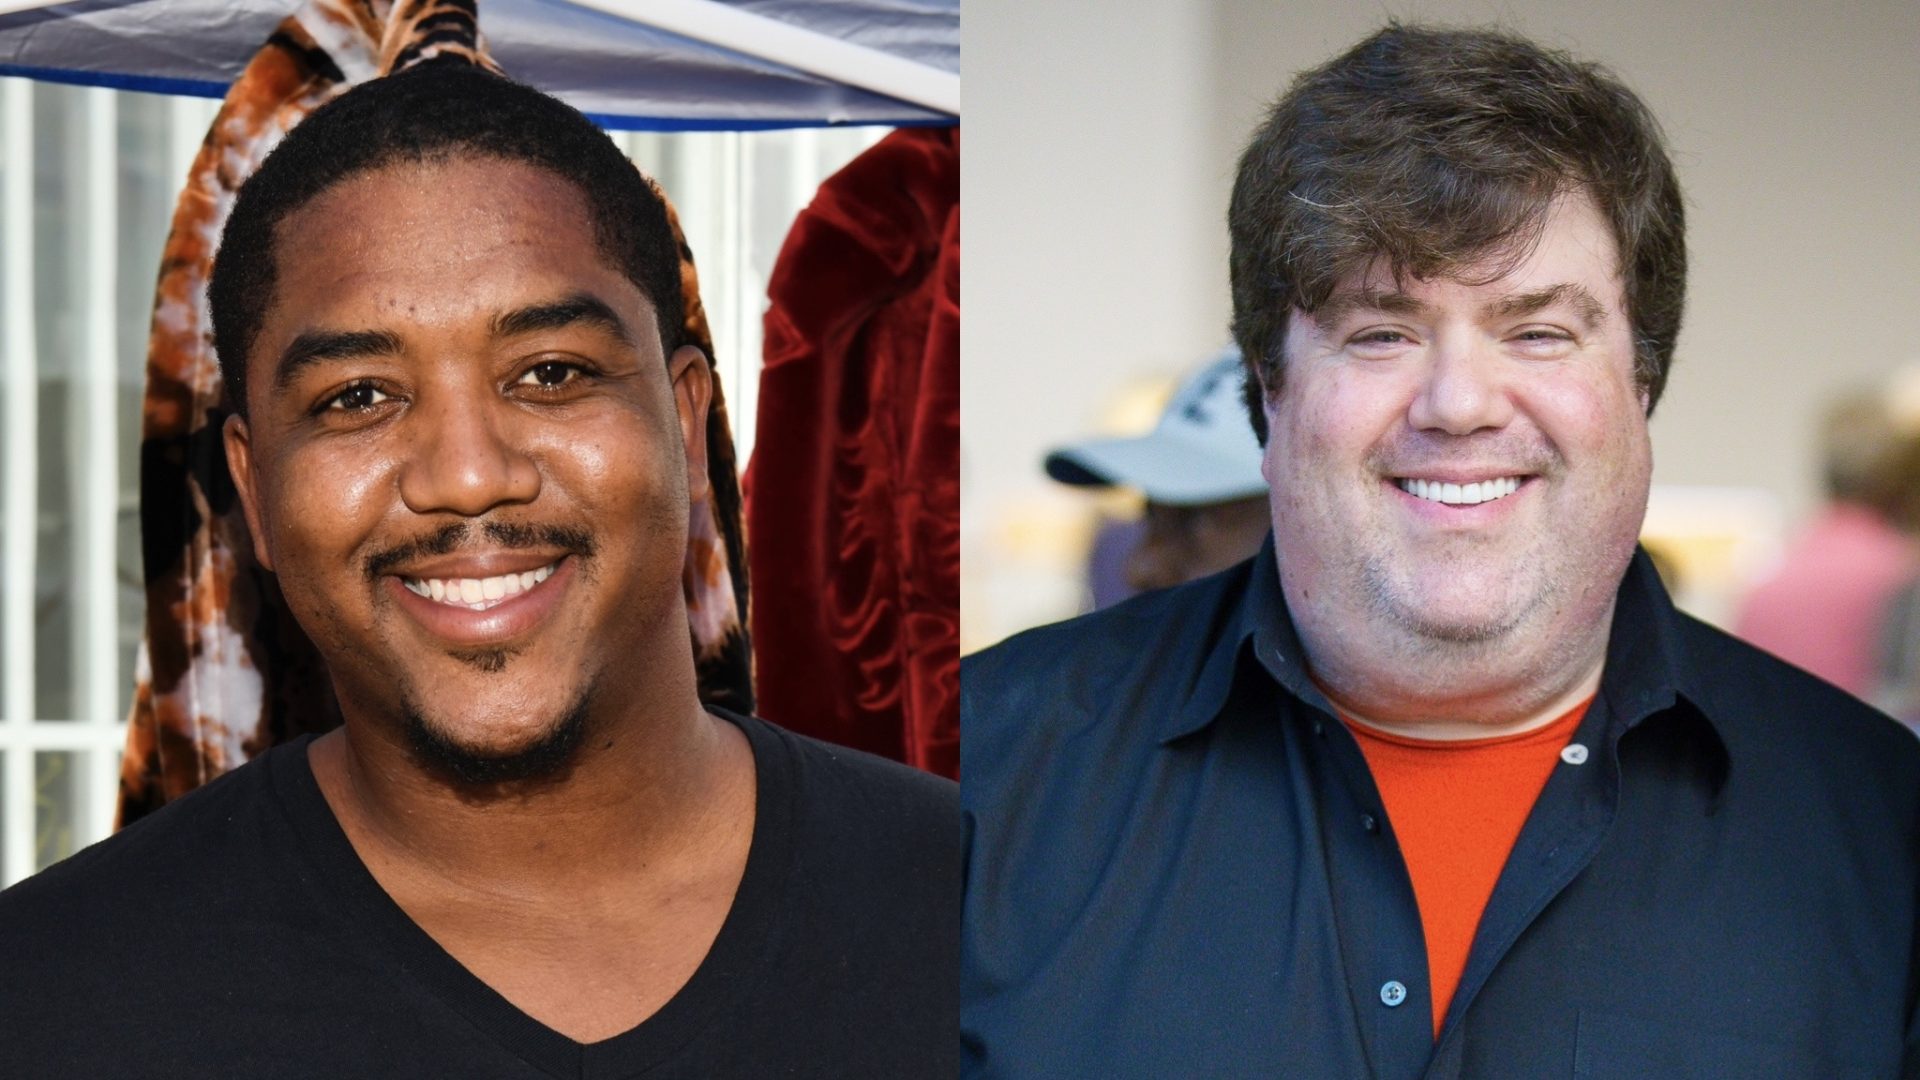 ‘Zoey 101’ Actor Christopher Massey Speaks Out After His Mom Doubles Down On Her Support For Dan Schneider (Video) thumbnail